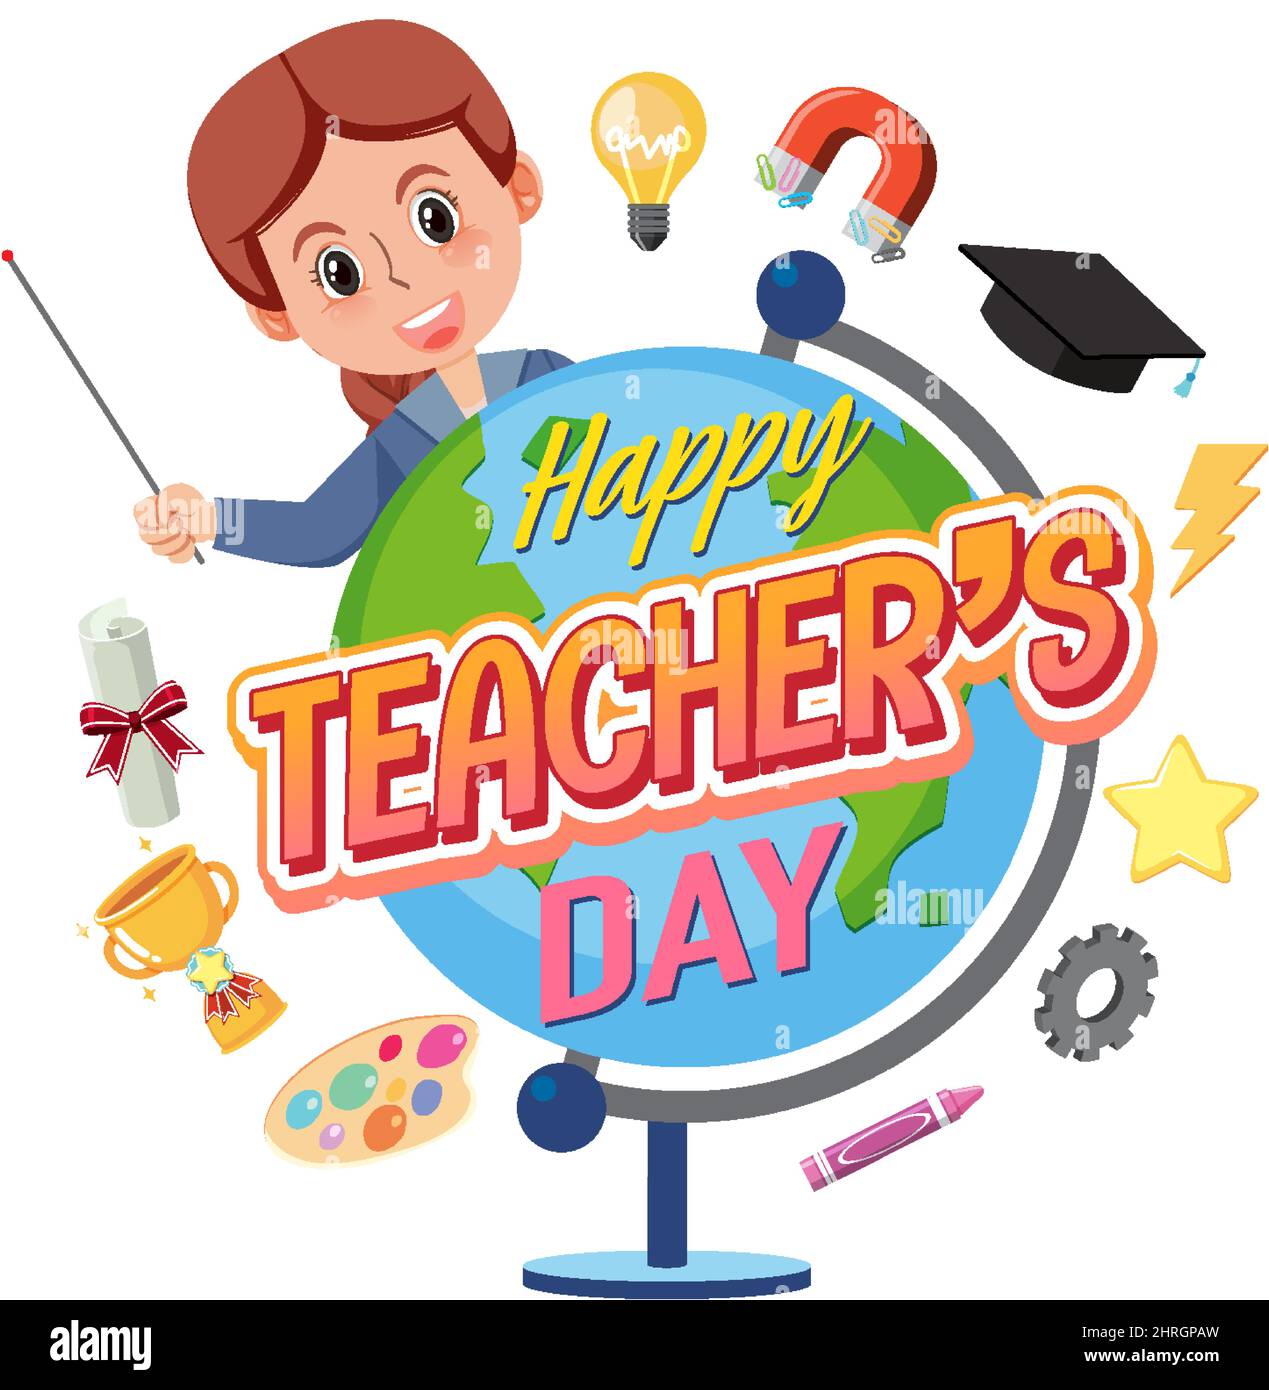 Happy Teacher's Day with a female teacher and school objects ...